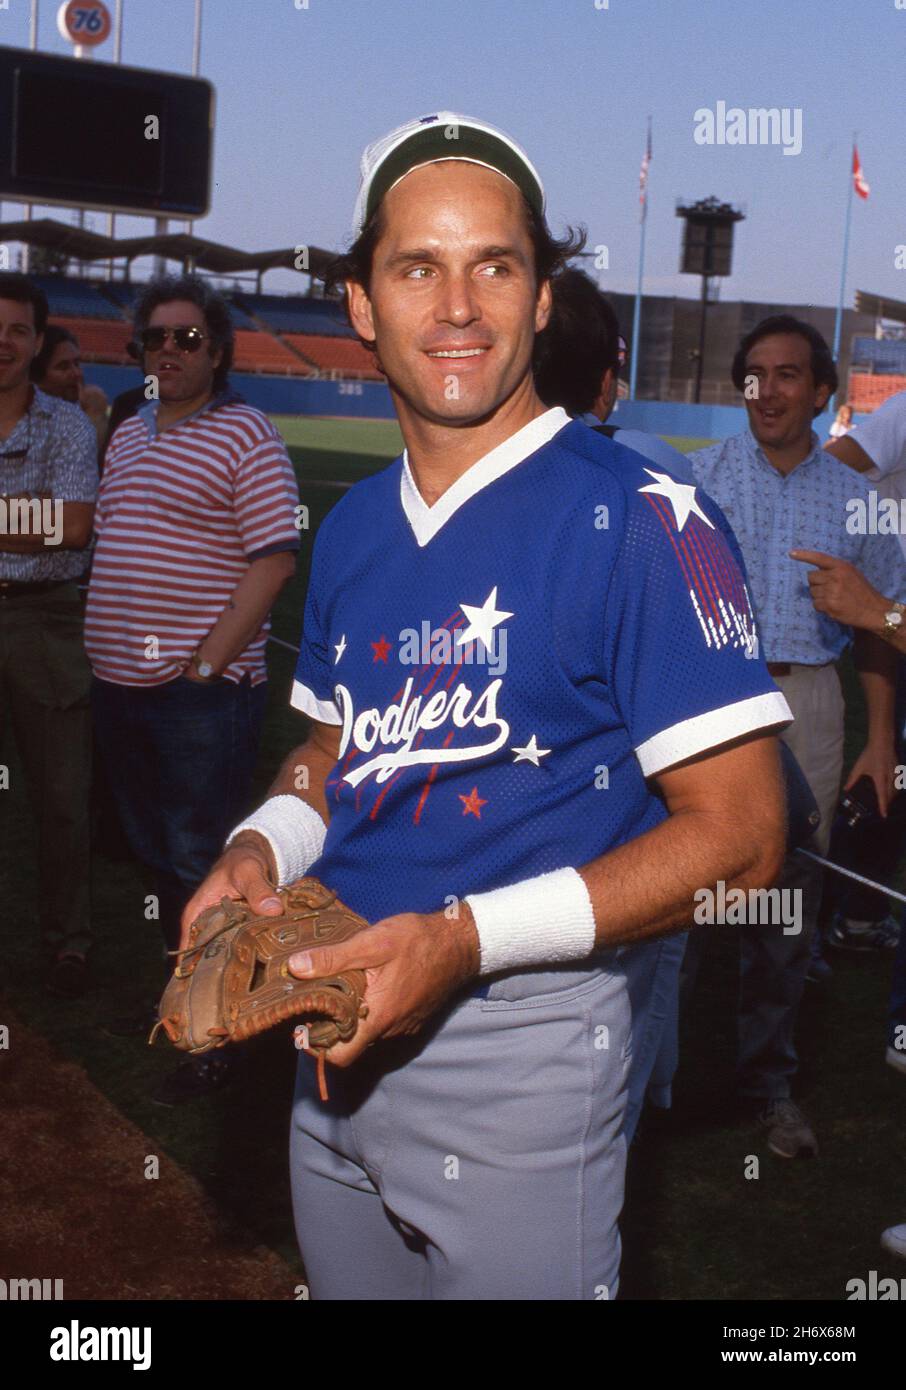 Gregory Harrison at the 30th Annual 'Hollywood Stars Night' Celebrity Baseball Game on August 20, 1988 at Dodger Stadium in Los Angeles, California Credit: Ralph Dominguez/MediaPunch Stock Photo